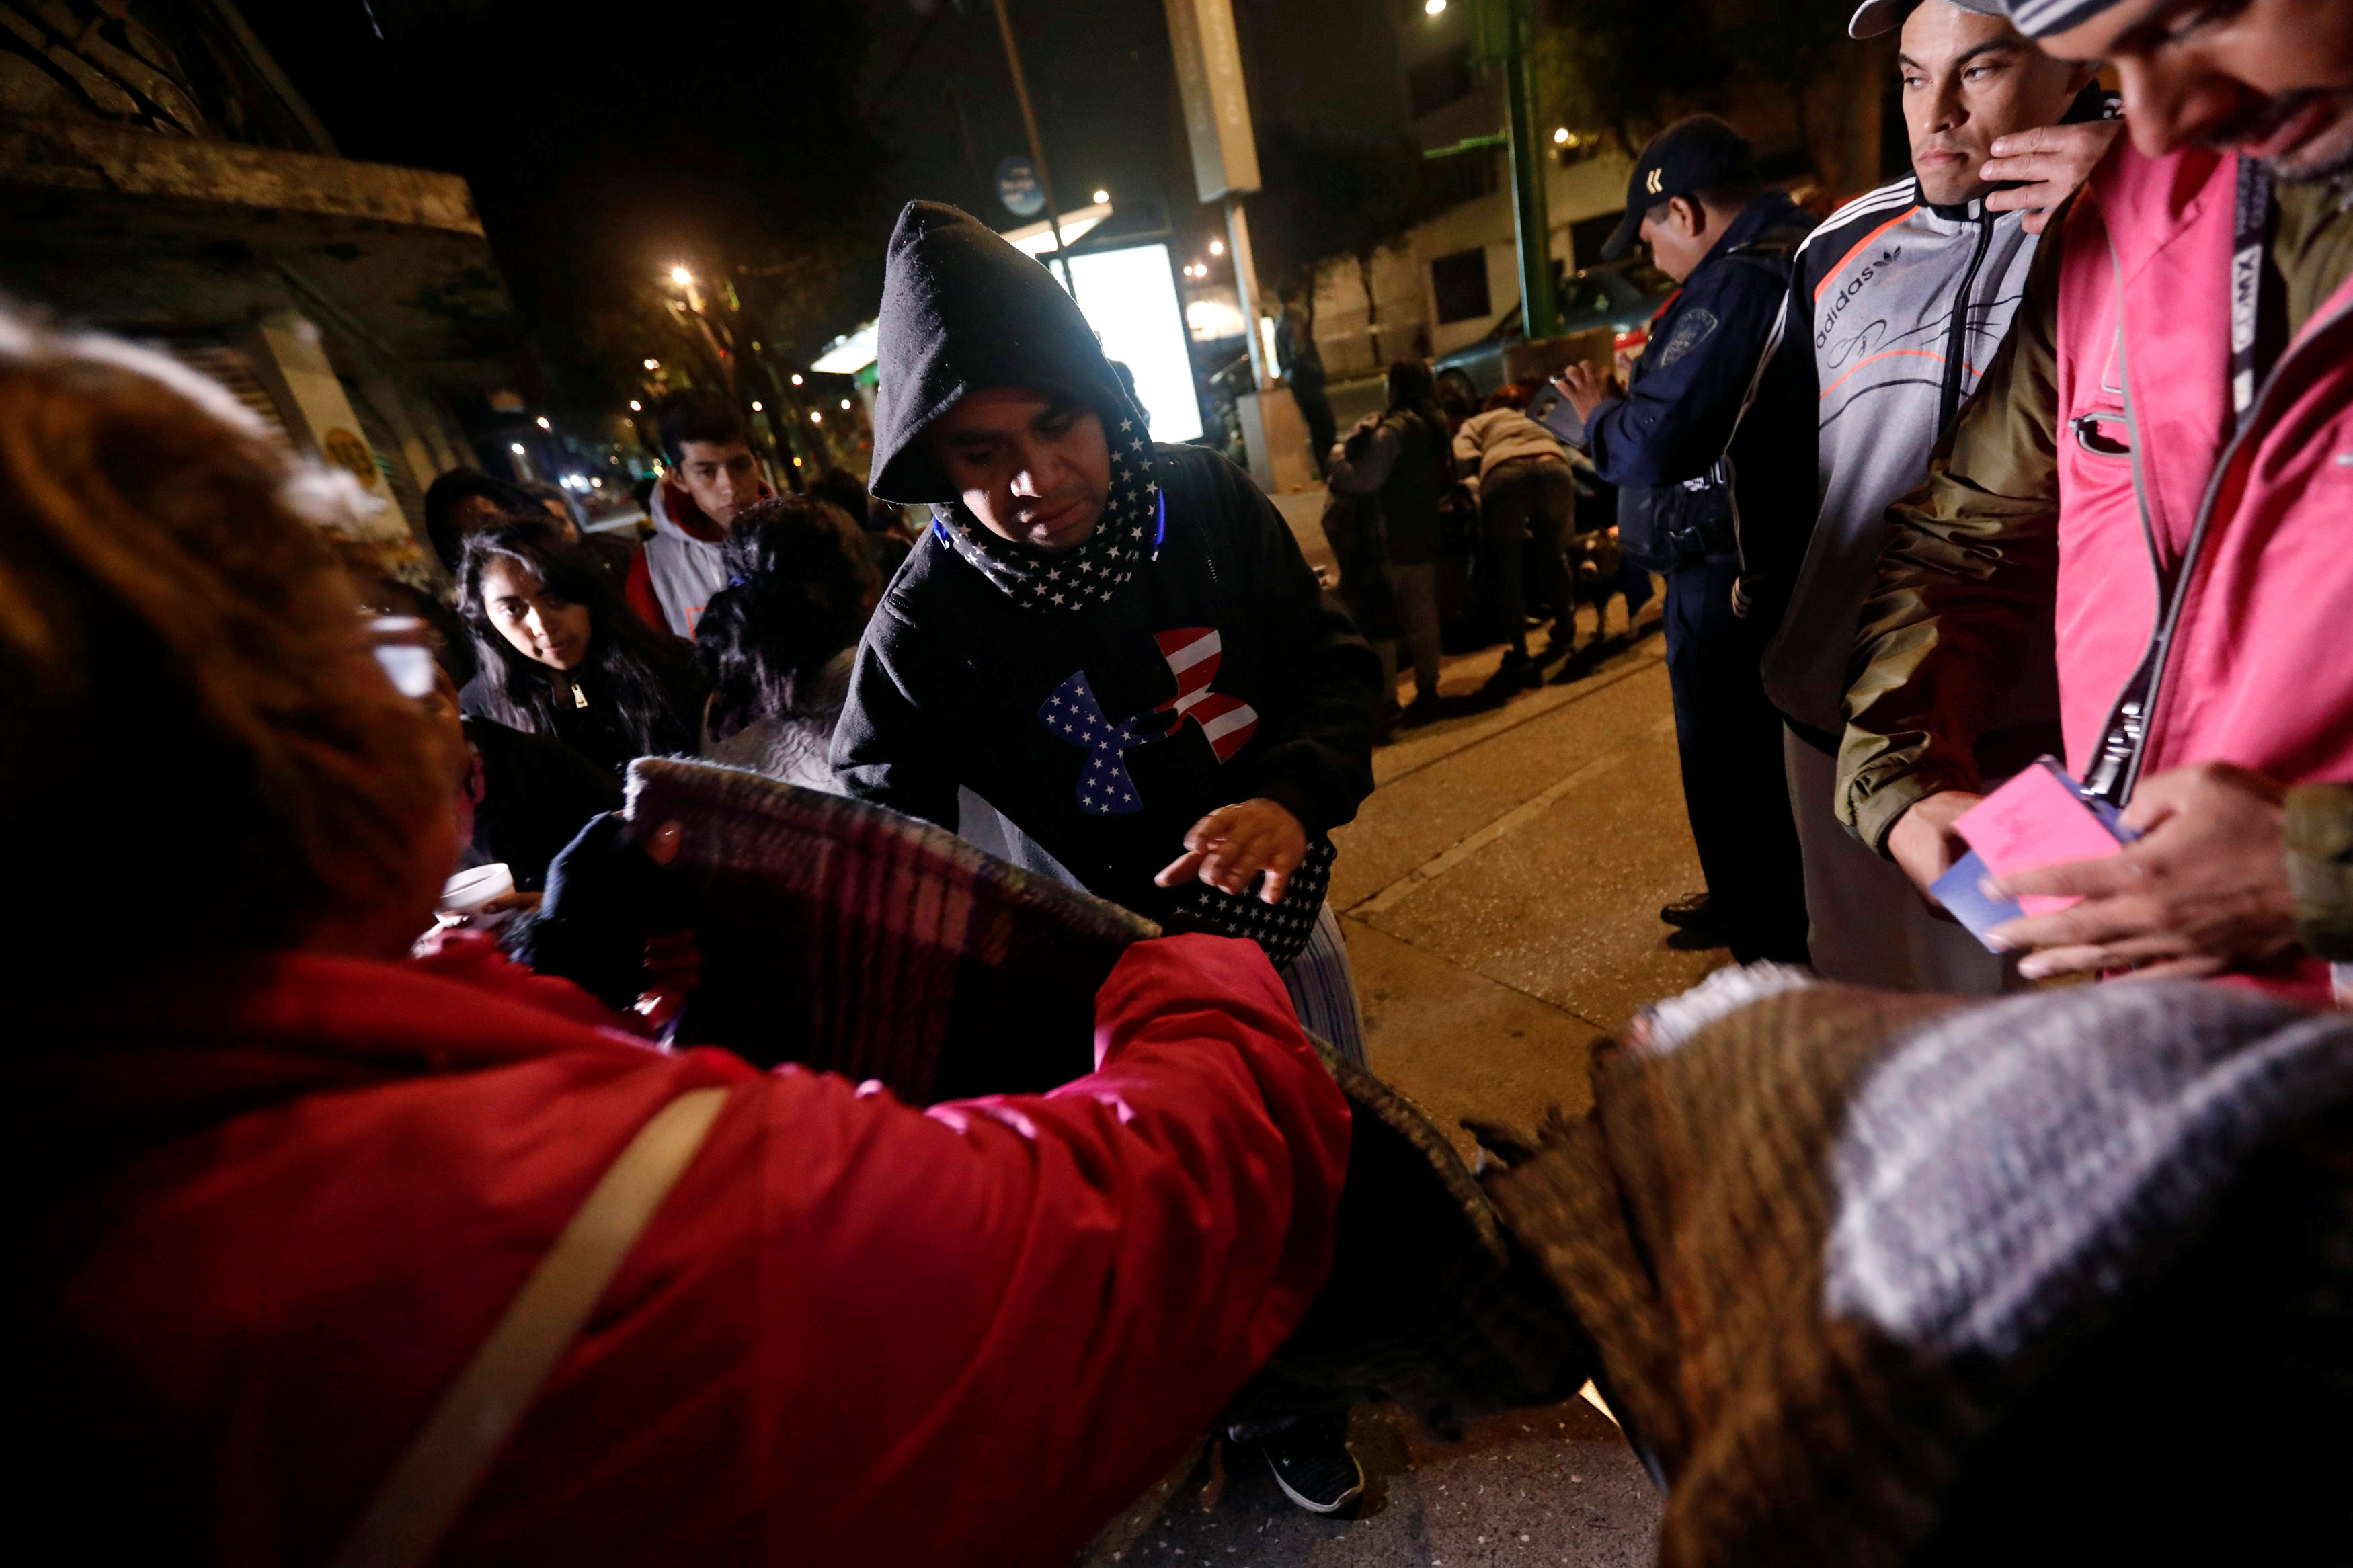 People gather on a street as they receive blankets after an earthquake hit Mexico City, Mexico on Sept. 8, 2017. (REUTERS/Edgard Garrido)